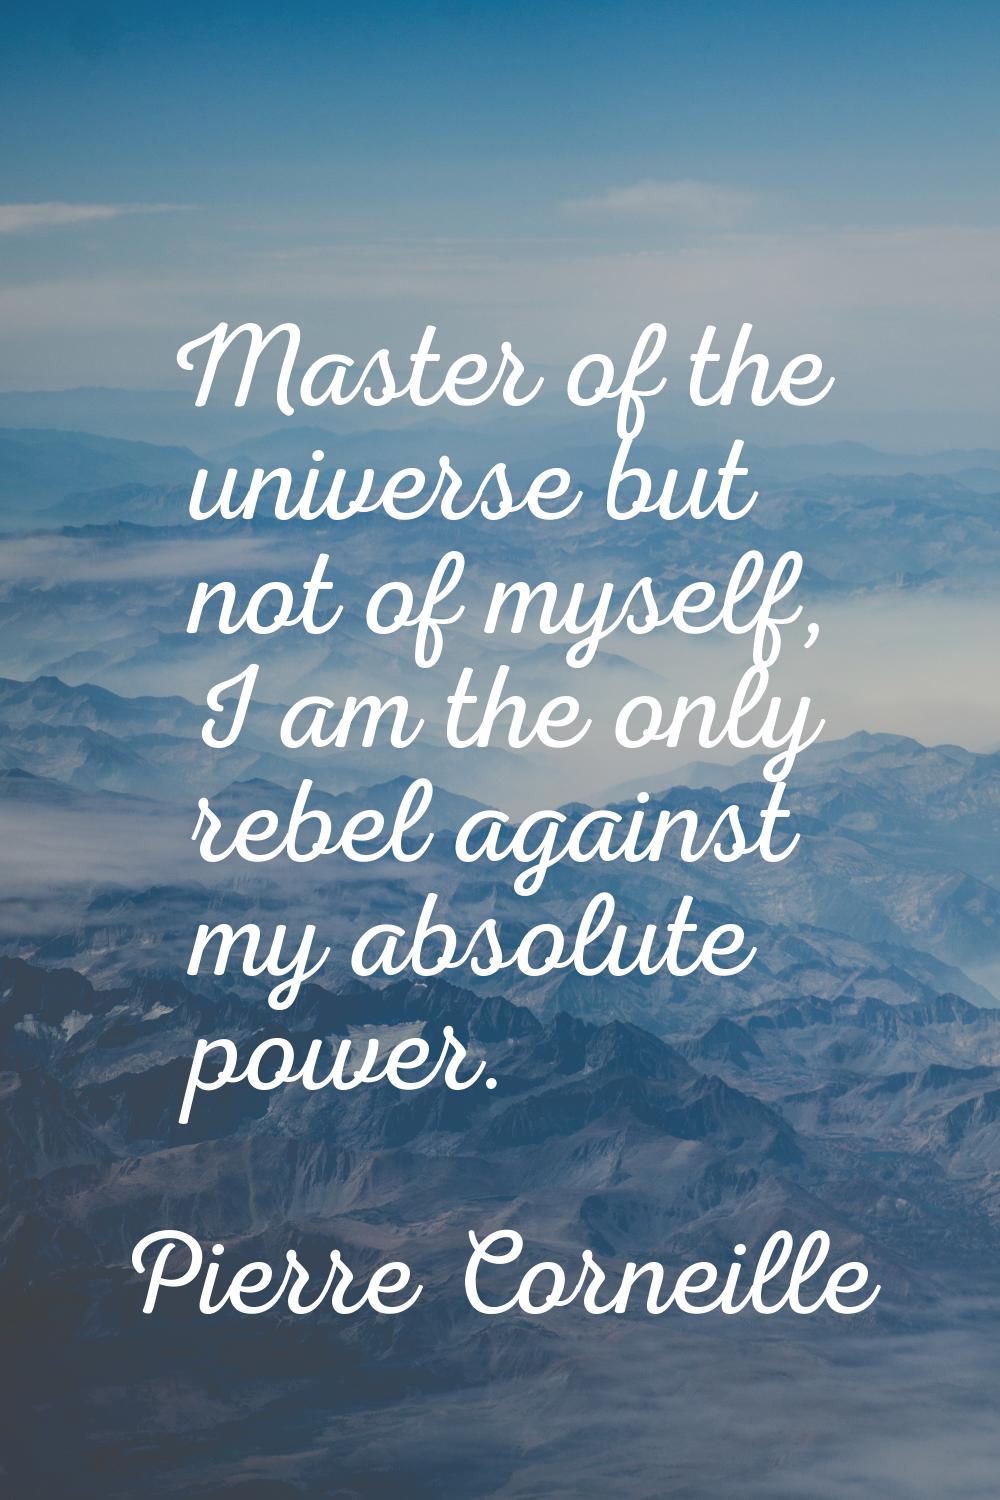 Master of the universe but not of myself, I am the only rebel against my absolute power.